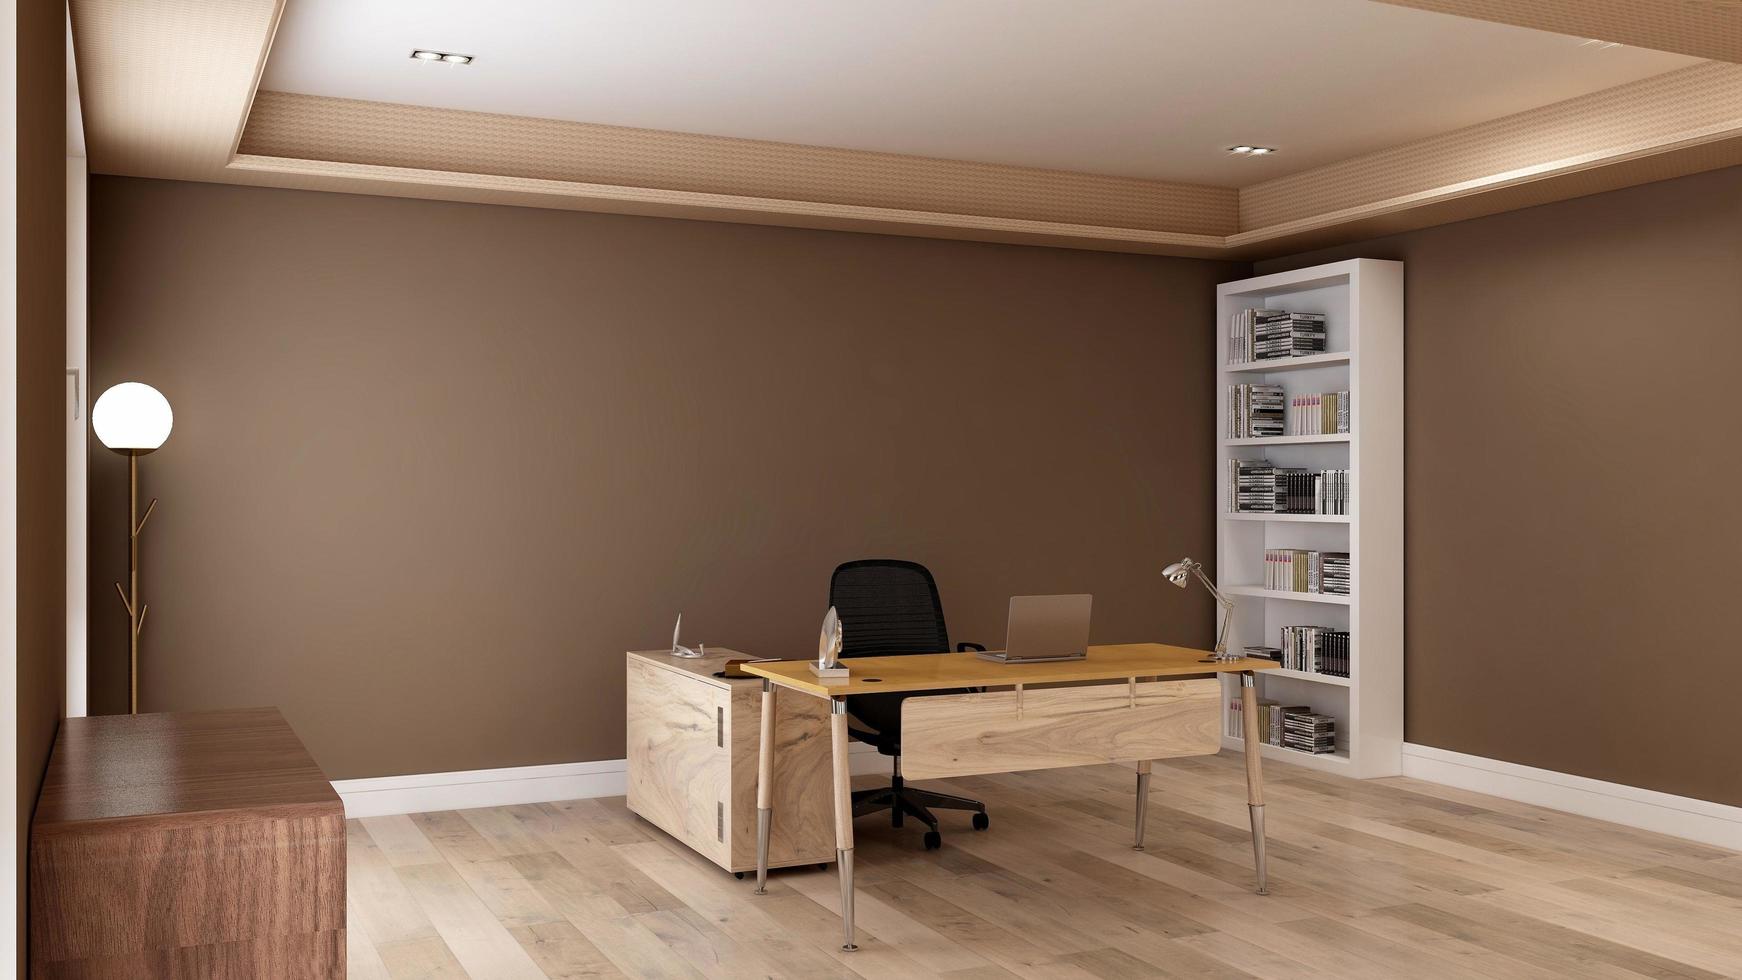 3d render office manager minimalist room photo